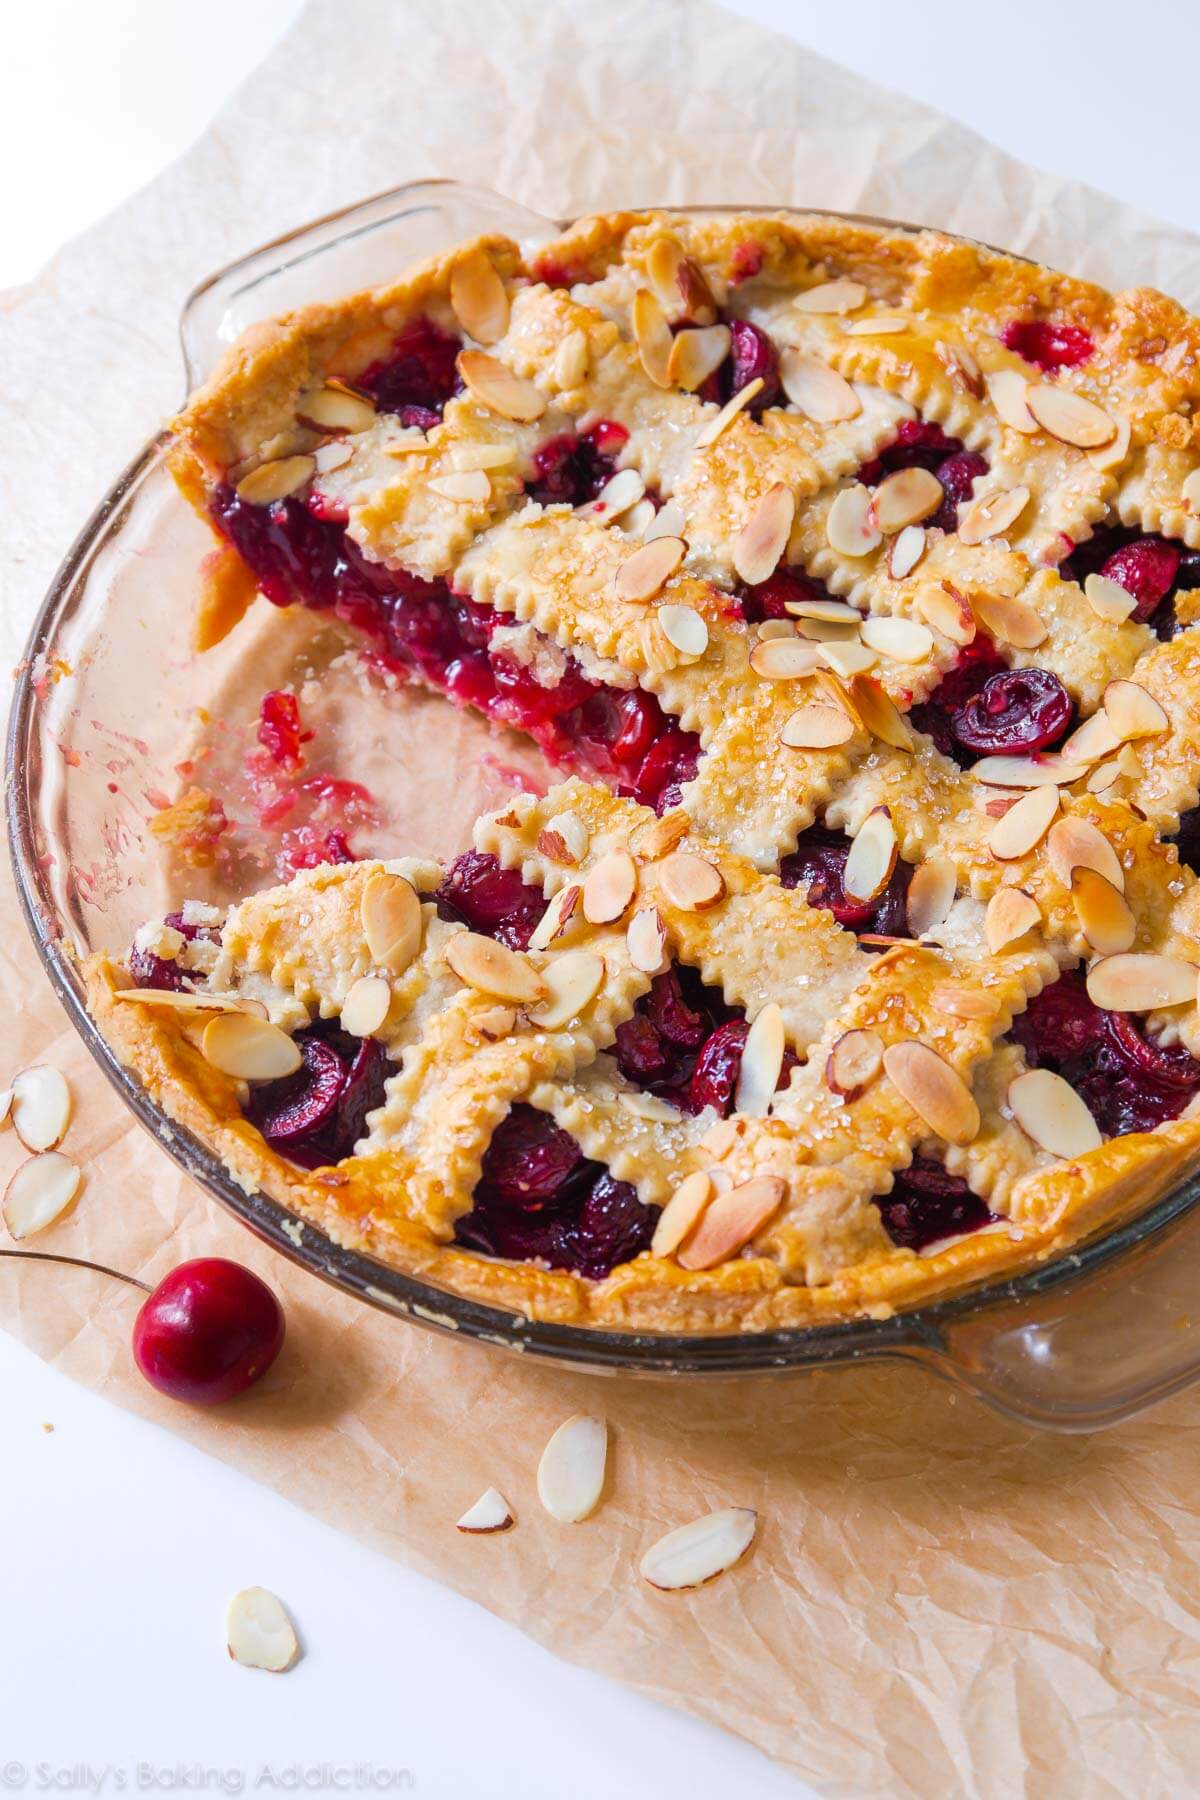 Sweet Cherry Pie with Toasted Almonds - Sallys Baking Addiction